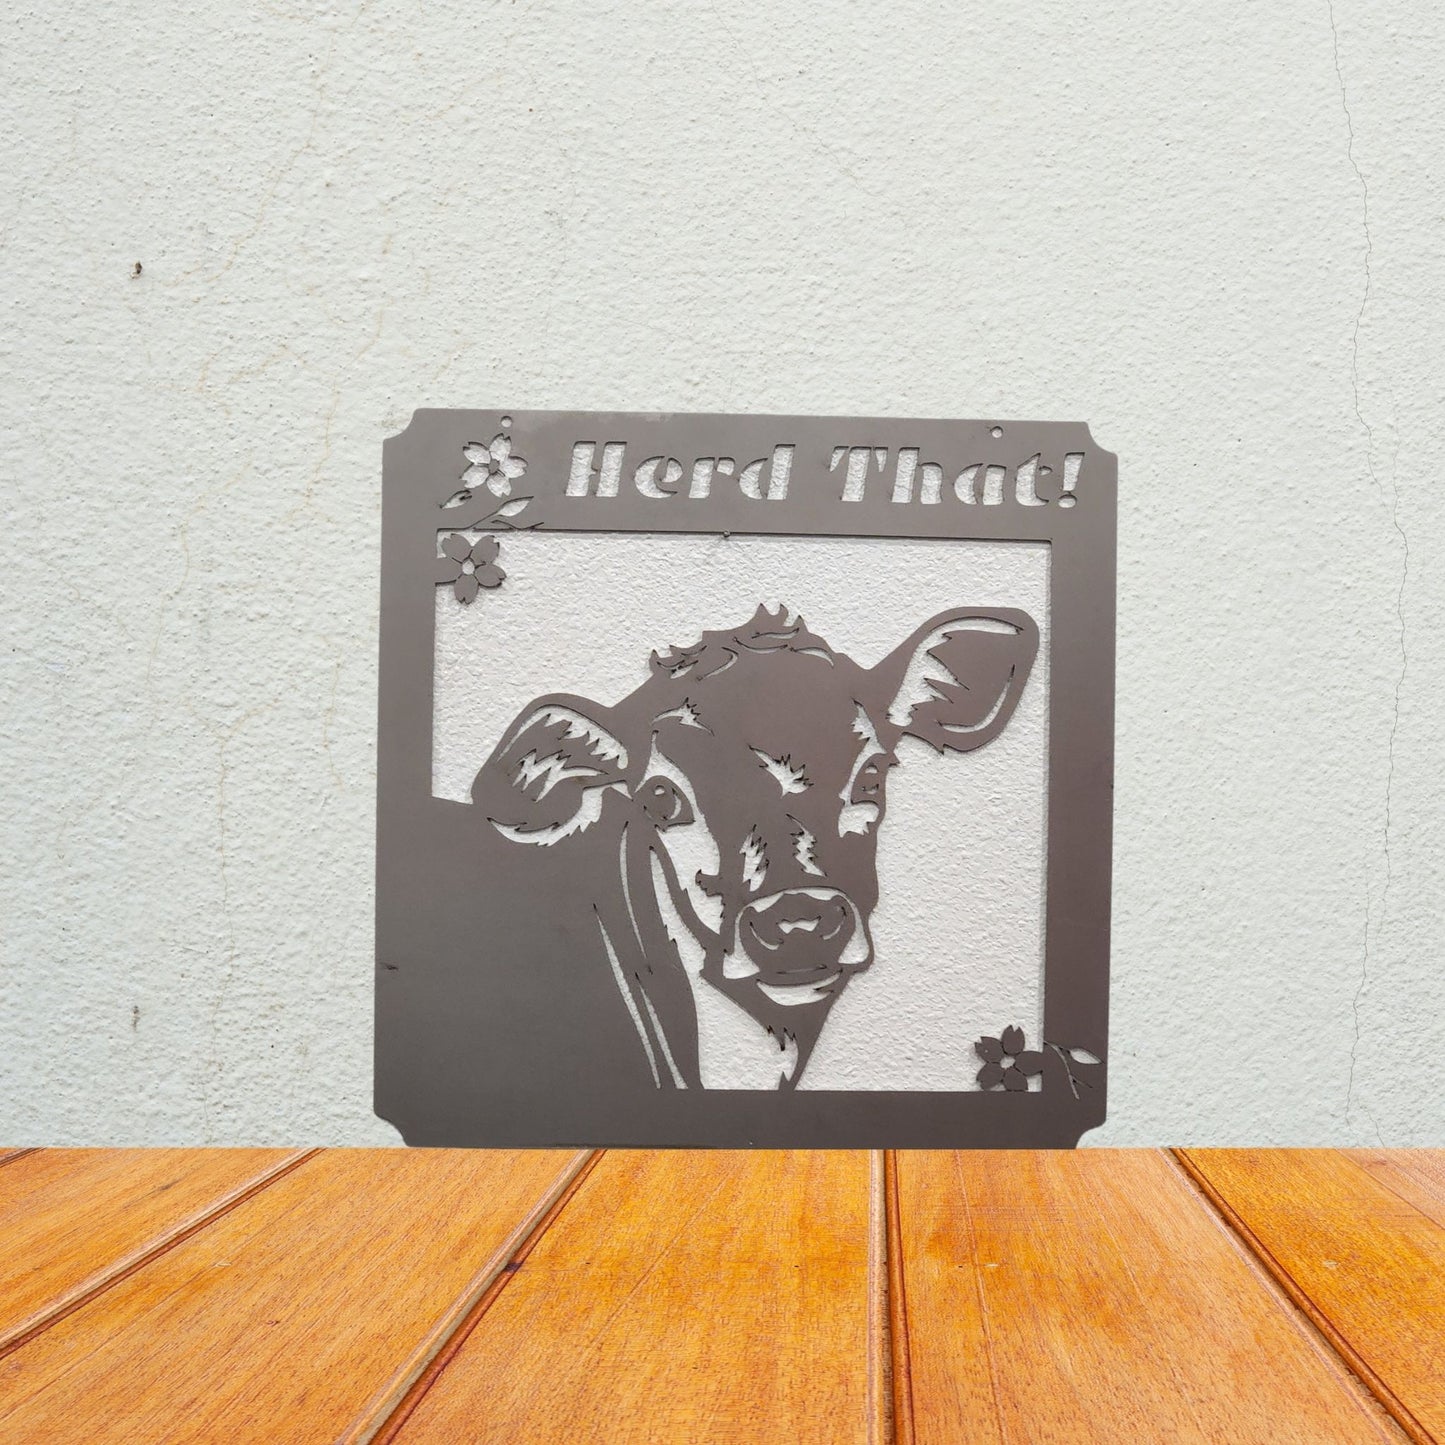 "Herd That" Metal Cow Wall Decor